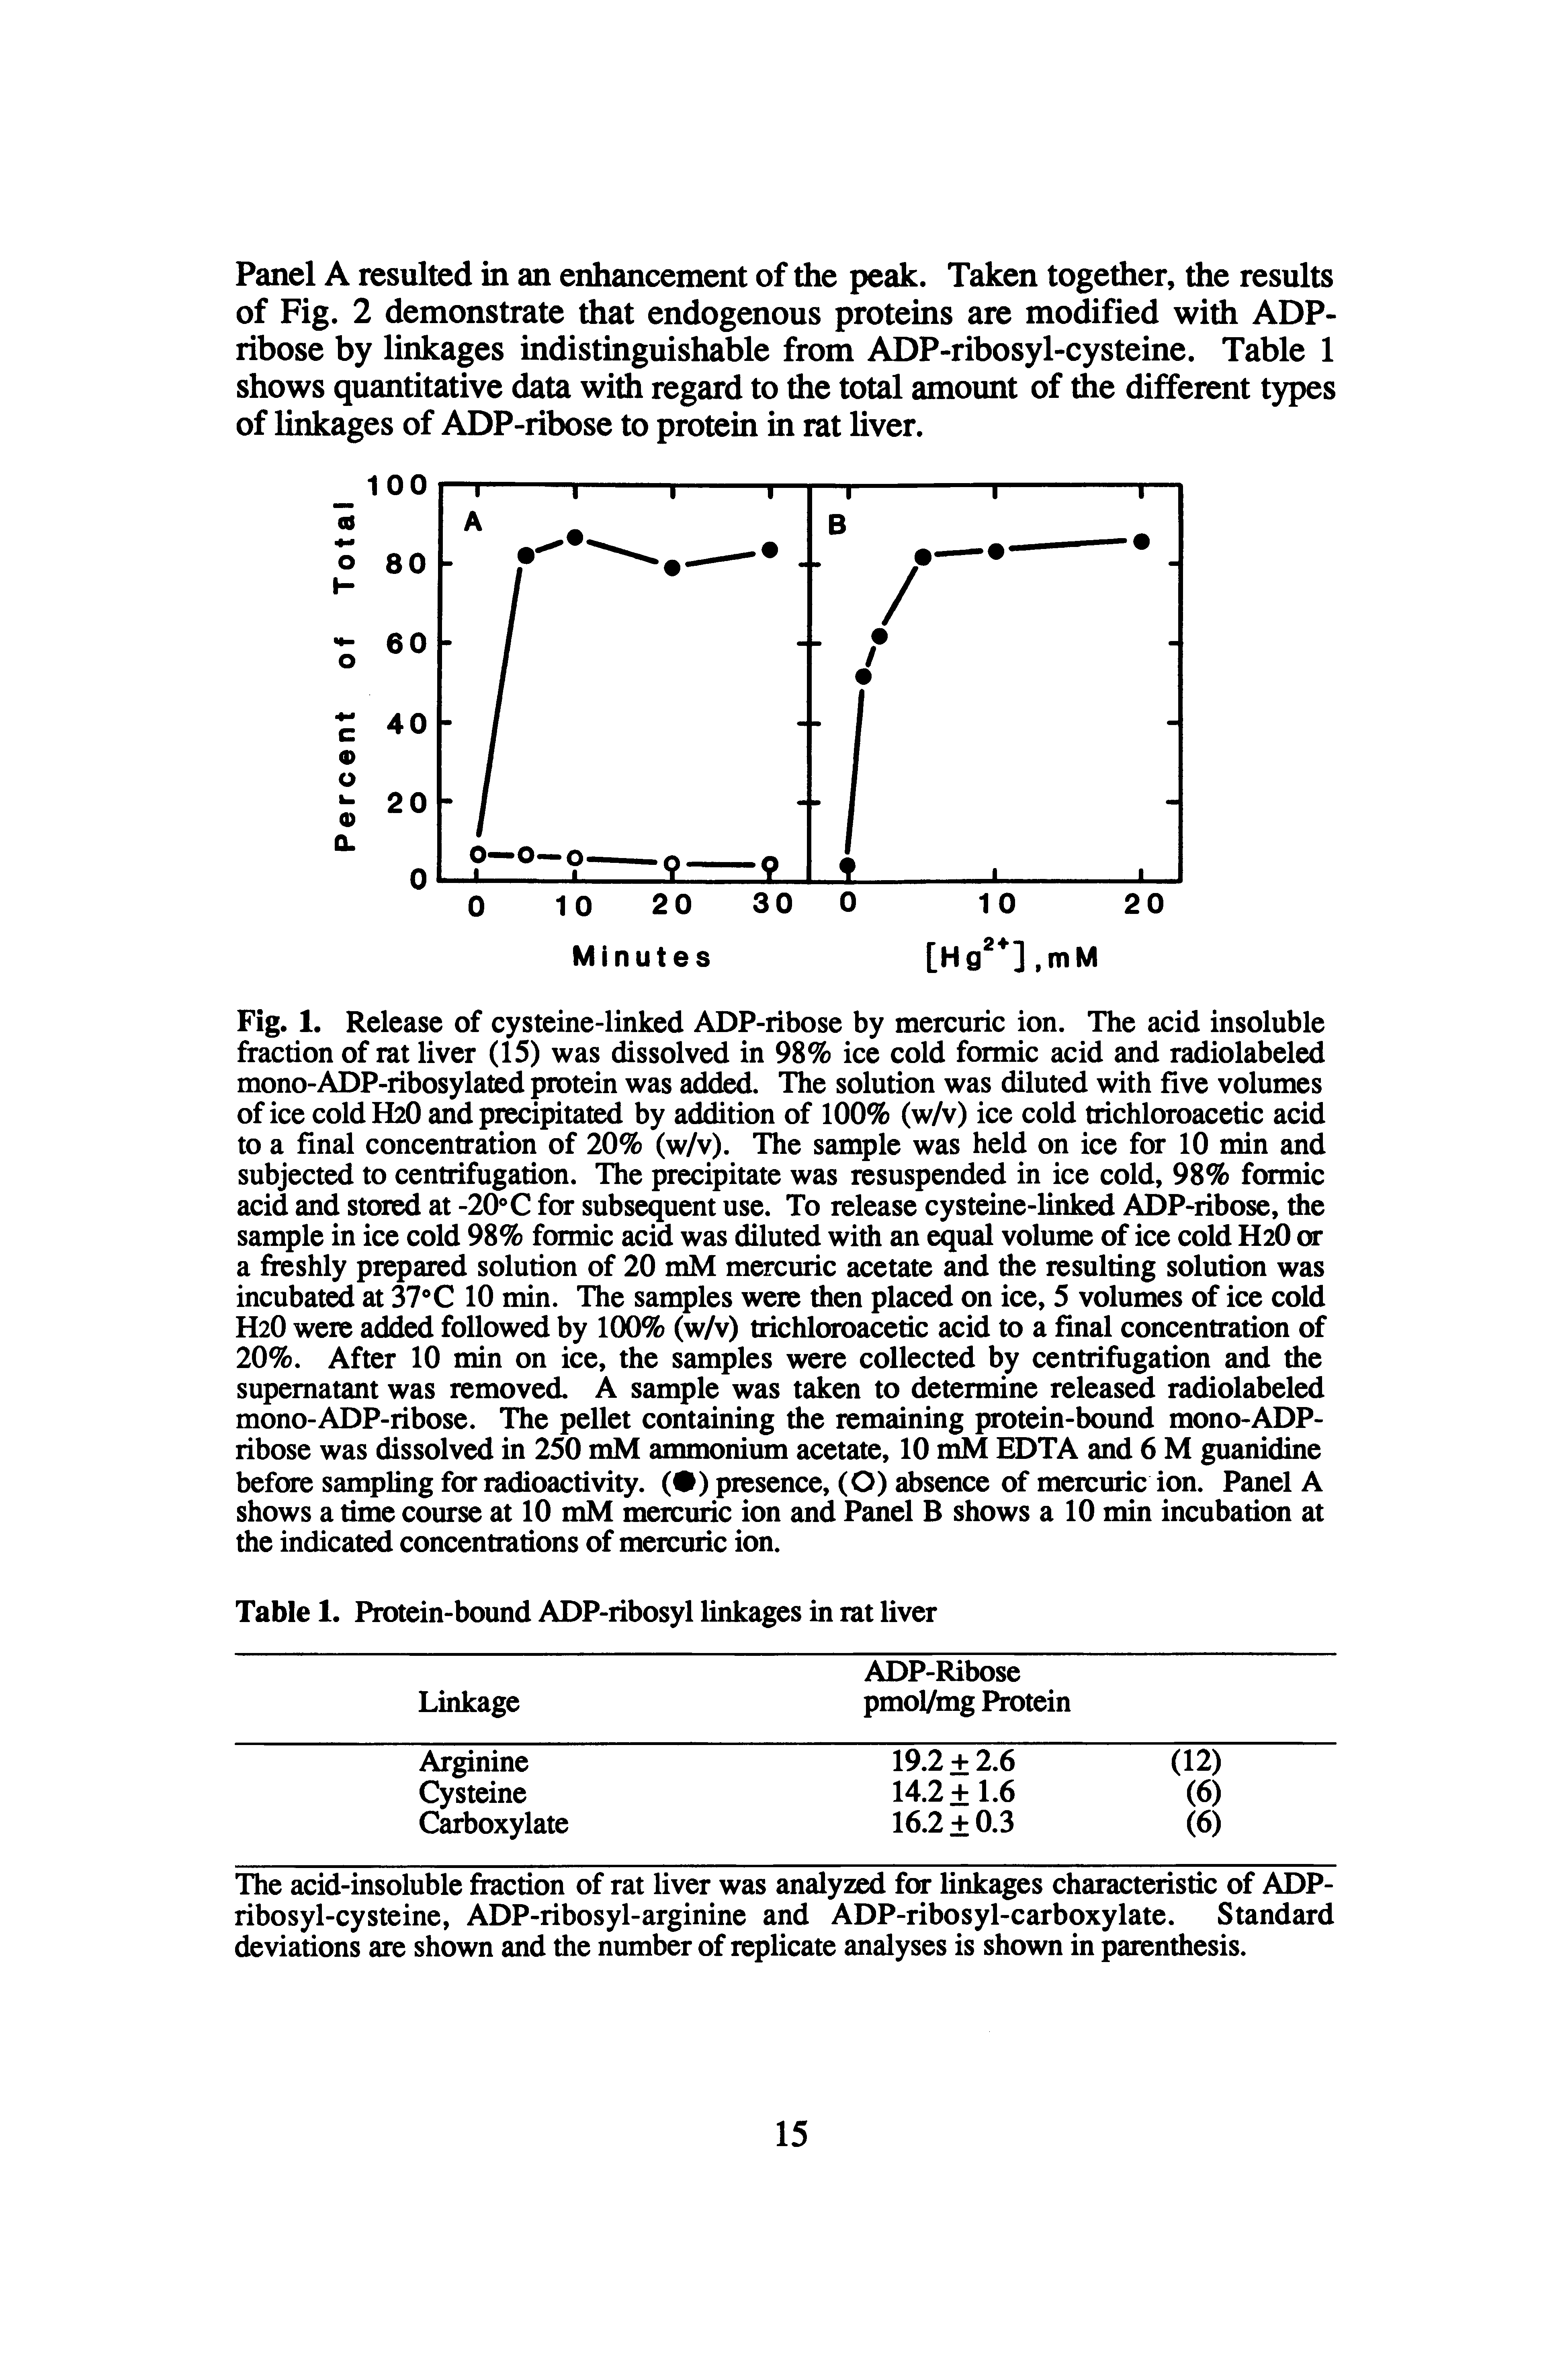 Fig. 1. Release of cysteine-linked ADP-ribose by mercuric ion. The acid insoluble fraction of rat liver (15) was dissolved in 98% ice cold formic acid and radiolabeled mono-ADP-ribosylated protein was added. The solution was diluted with five volumes of ice cold H2O and precipitated by addition of 100% (w/v) ice cold trichloroacetic acid to a final concentration of 20% (w/v). The sample was held on ice for 10 min and subjected to centrifugation. The precipitate was resuspended in ice cold, 98% formic acid and stored at -20° C for subsequent use. To release cysteine-linked ADP-ribose, the sample in ice cold 98% formic acid was diluted with an equal volume of ice cold H2O or a freshly prepared solution of 20 mM mercuric acetate and the resulting solution was incubat at 37°C 10 min. The samples were then placed on ice, 5 volumes of ice cold H2O were added followed by 100% (w/v) trichloroacetic acid to a final concentration of 20%. After 10 min on ice, the samples were collected by centrifugation and the supernatant was removed. A sample was taken to determine released radiolabeled mono-ADP-ribose. The pellet containing the remaining protein-bound mono-ADP-ribose was dissolved in 250 mM ammonium acetate, 10 EDTA and 6 M guanidine before sampling for radioactivity. ( ) presence, (O) absence of mercuric ion. Panel A shows a time course at 10 mM mercuric ion and Panel B shows a 10 min incubation at the indicated concentrations of mercuric ion.